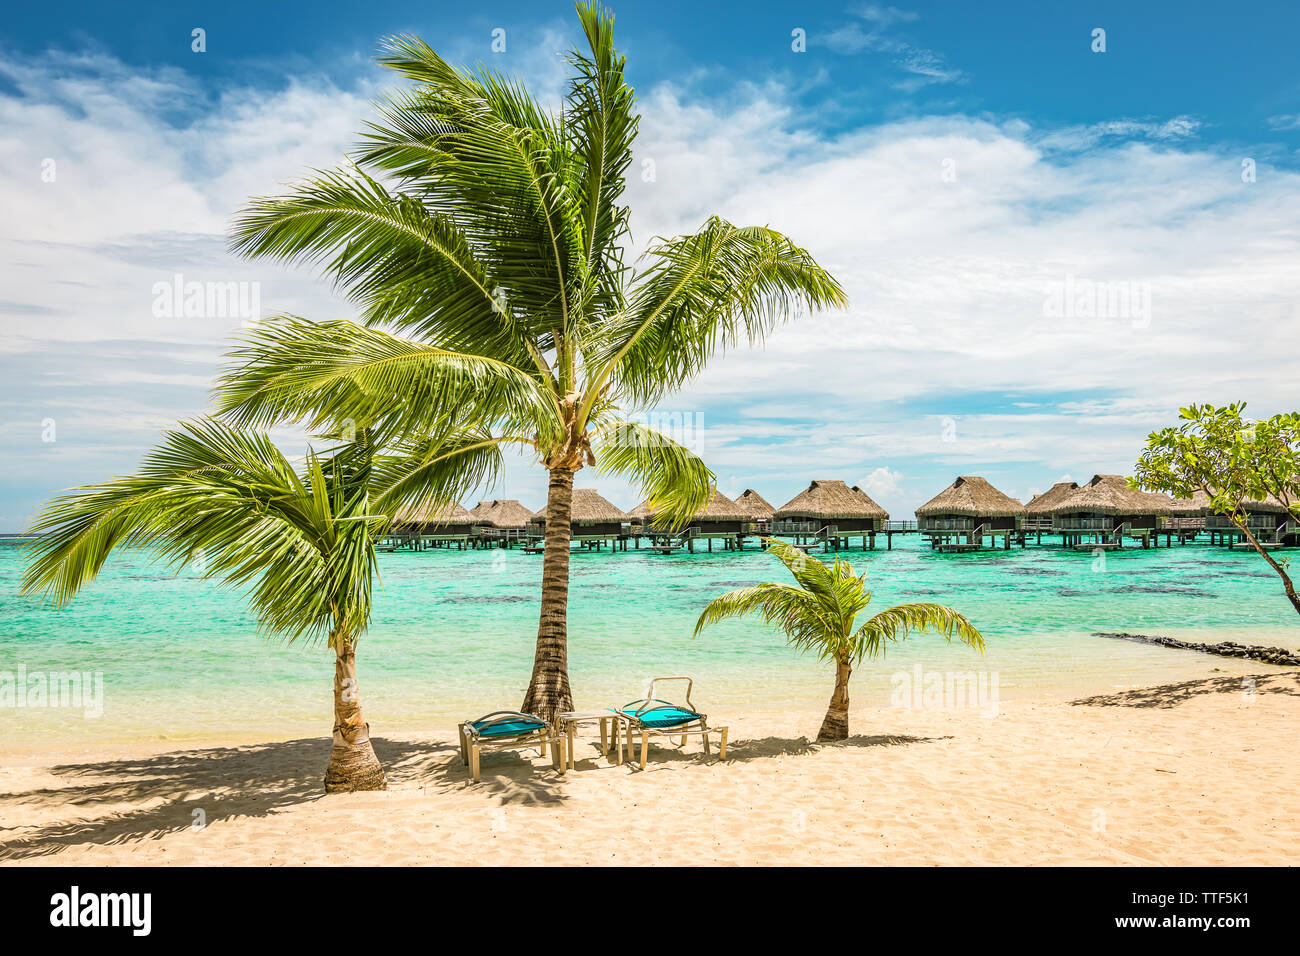 Tropical beach with palm trees and sun beds. Stock Photo